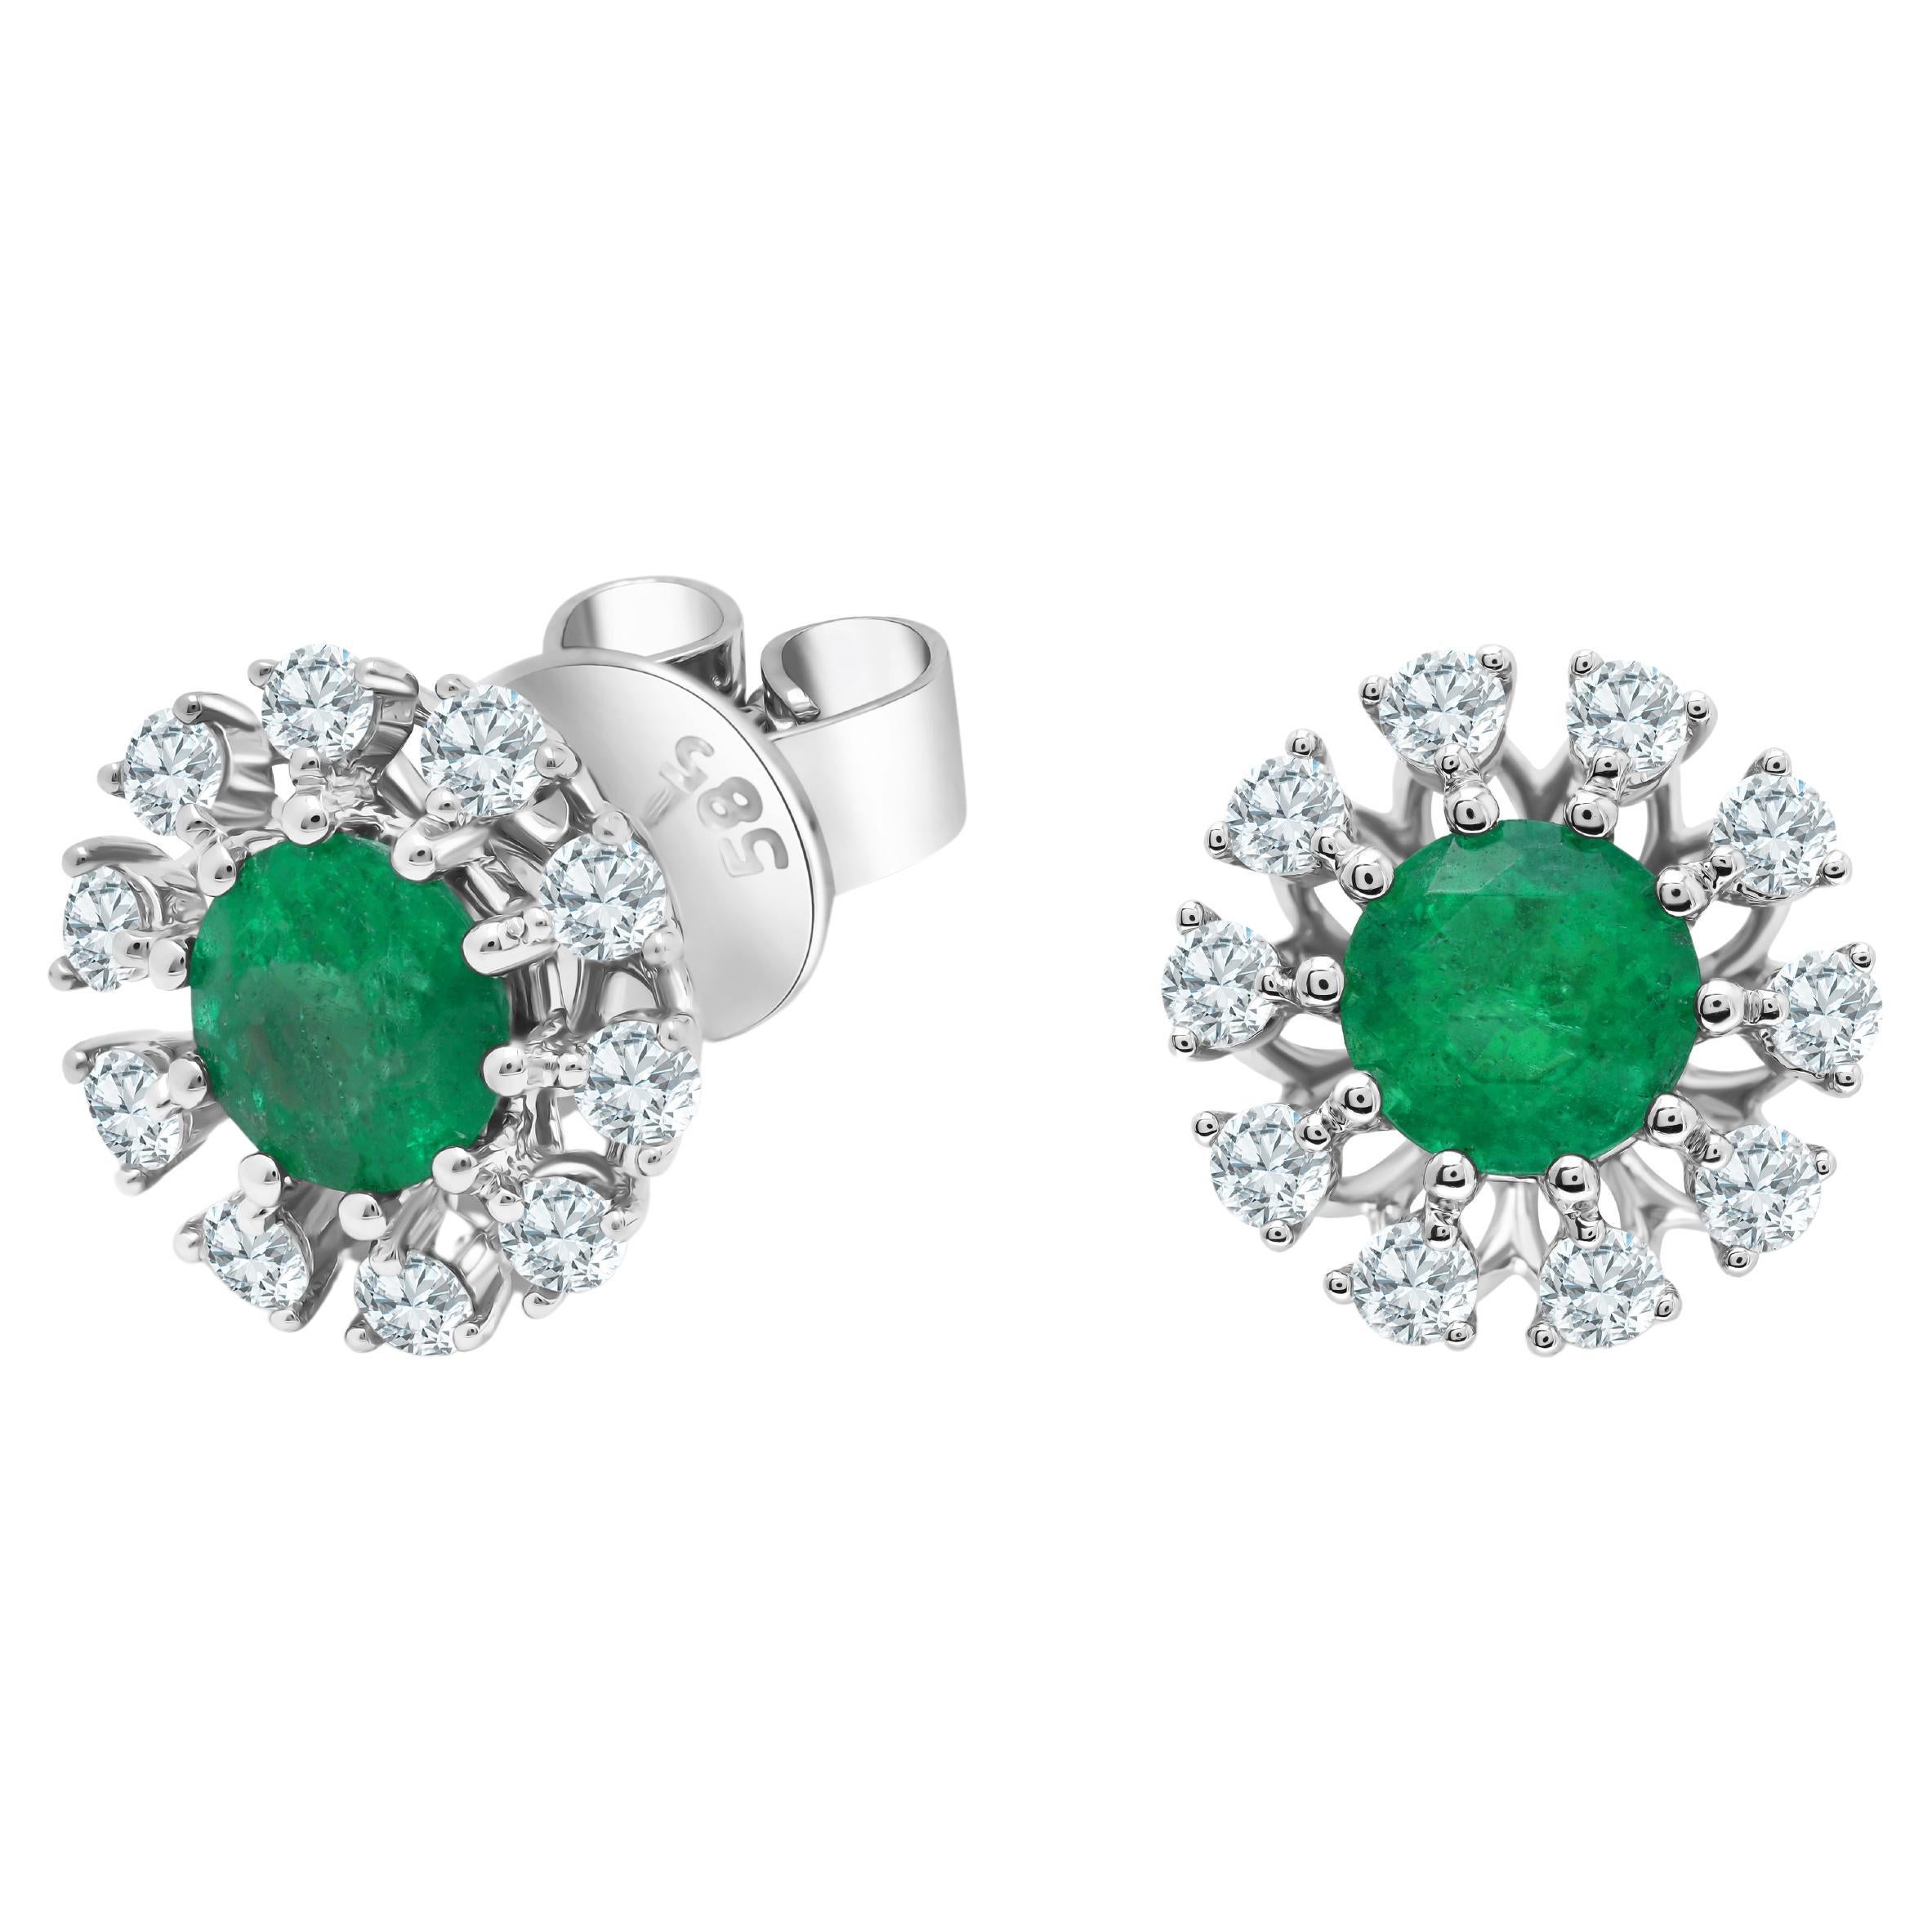 1.08 Carat Round Emerald and 0.5 Carat Natural Diamond Earrings in 14W ref2155